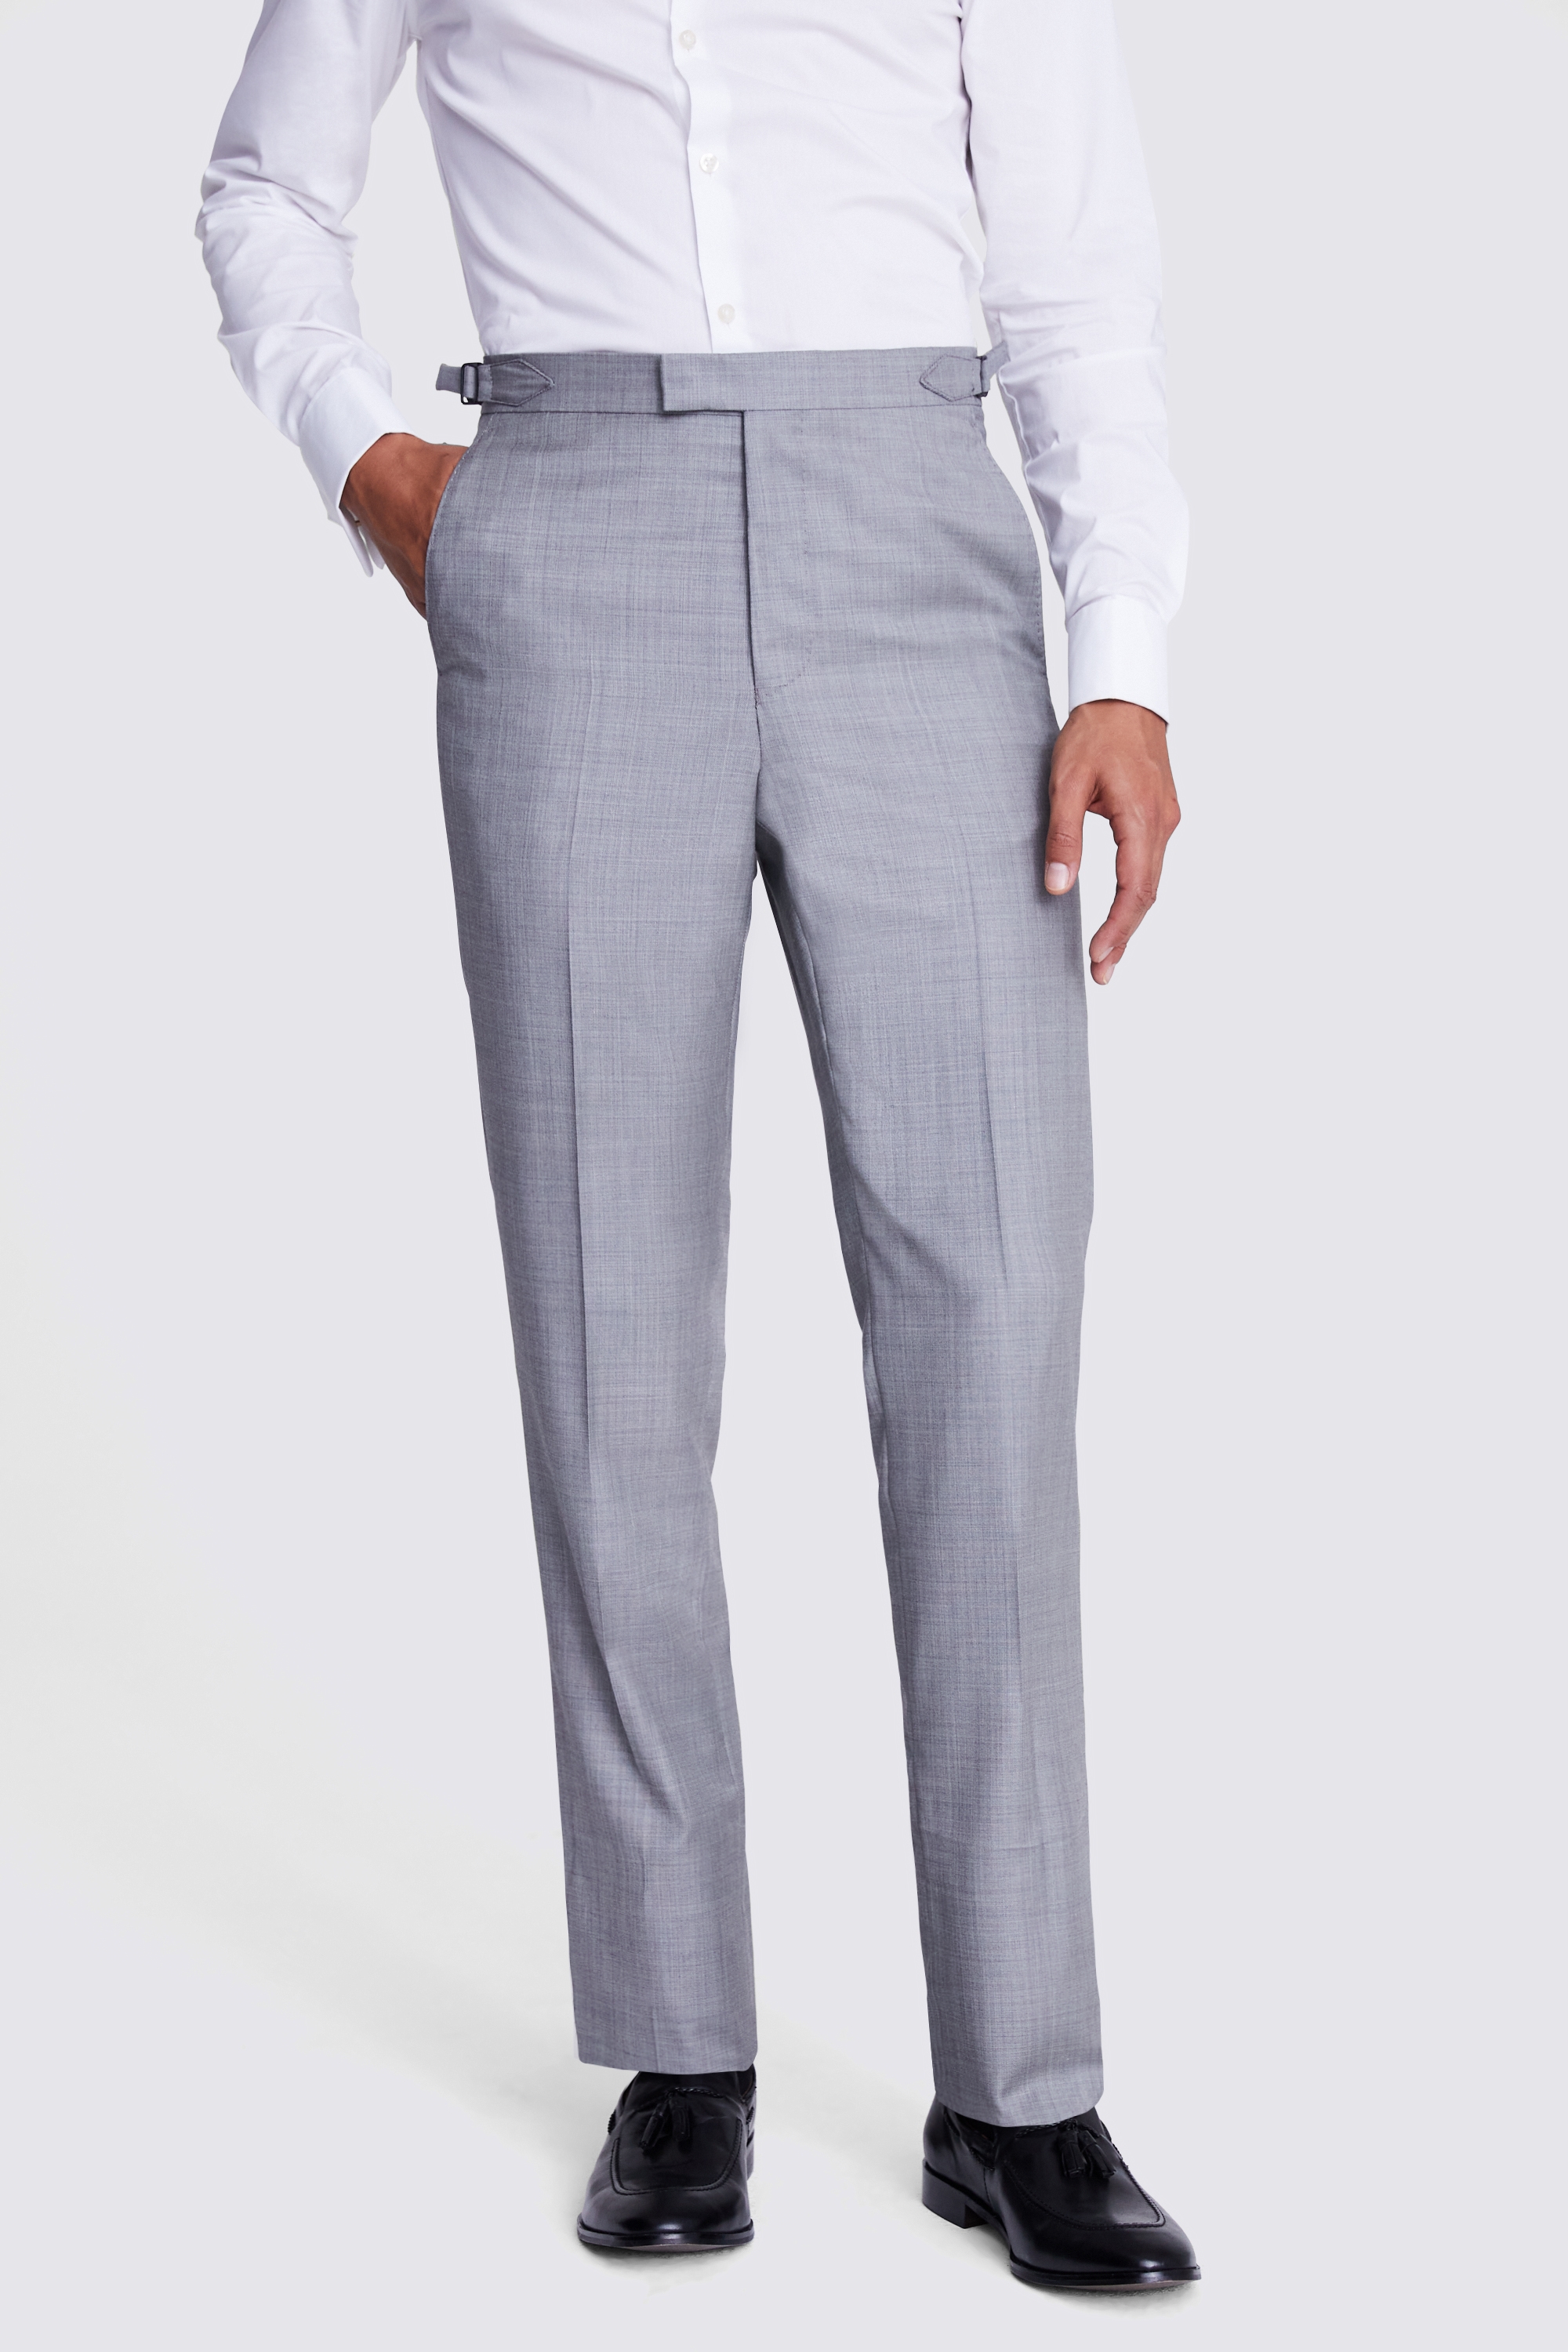 JPRCLEAN Slim Fit Tailored Trousers with 40% discount! | Jack & Jones®